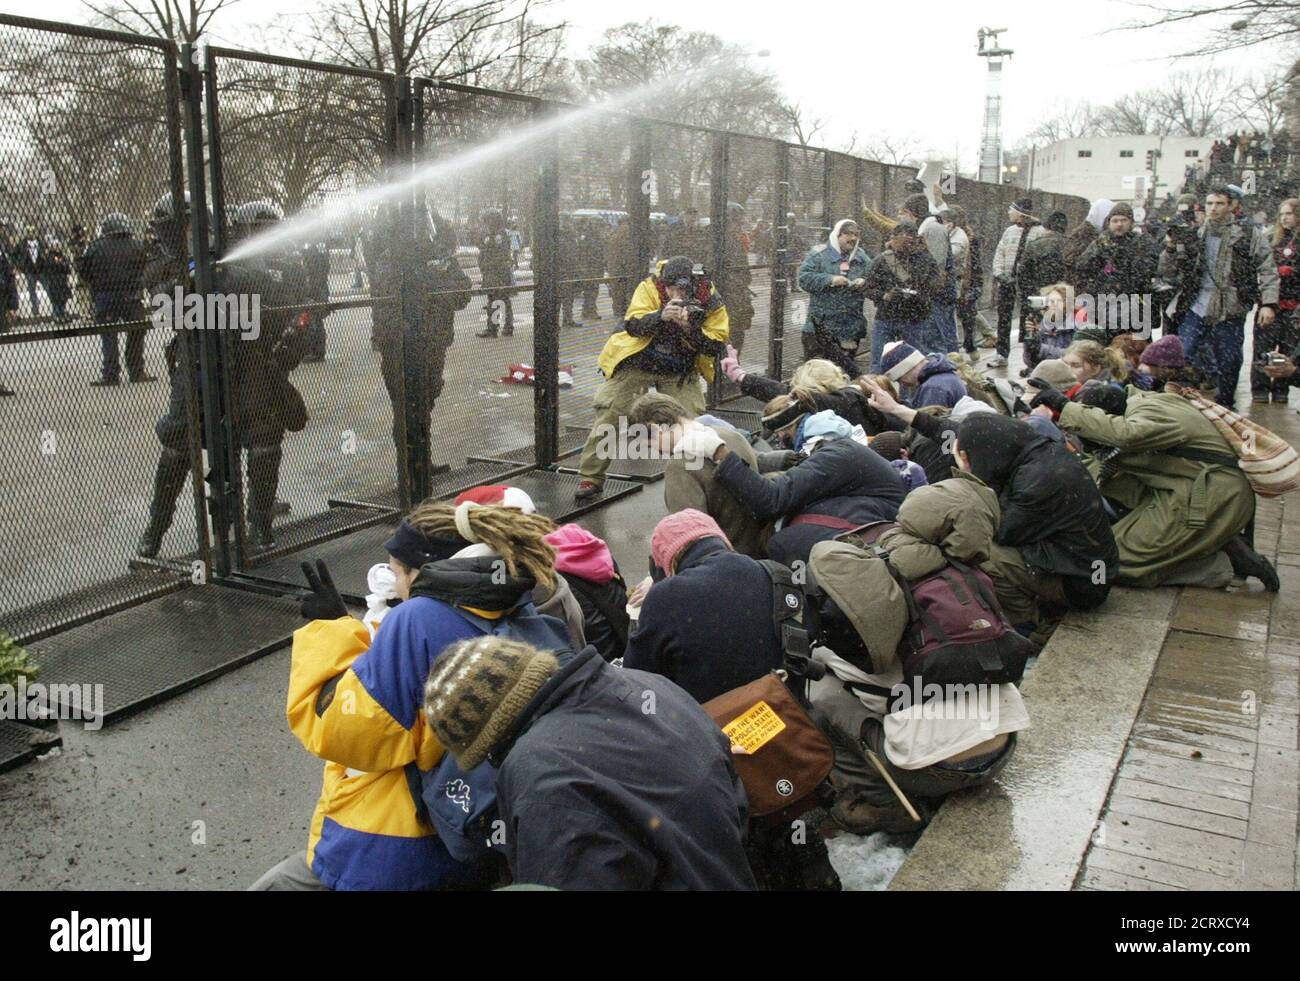 Police officers fire streams of pepper spray over a crowd of protesters after demonstrators threw objects over the fence at police as the Bush inaugural parade passed by on Pennsylvania Avenue in Washington, January 20, 2005. Anti-war chants competed with pomp and circumstance as the inauguration of President George W. Bush for a second term took place amid the barricaded streets of central Washington. REUTERS/Jim Bourg  JRB Stock Photo